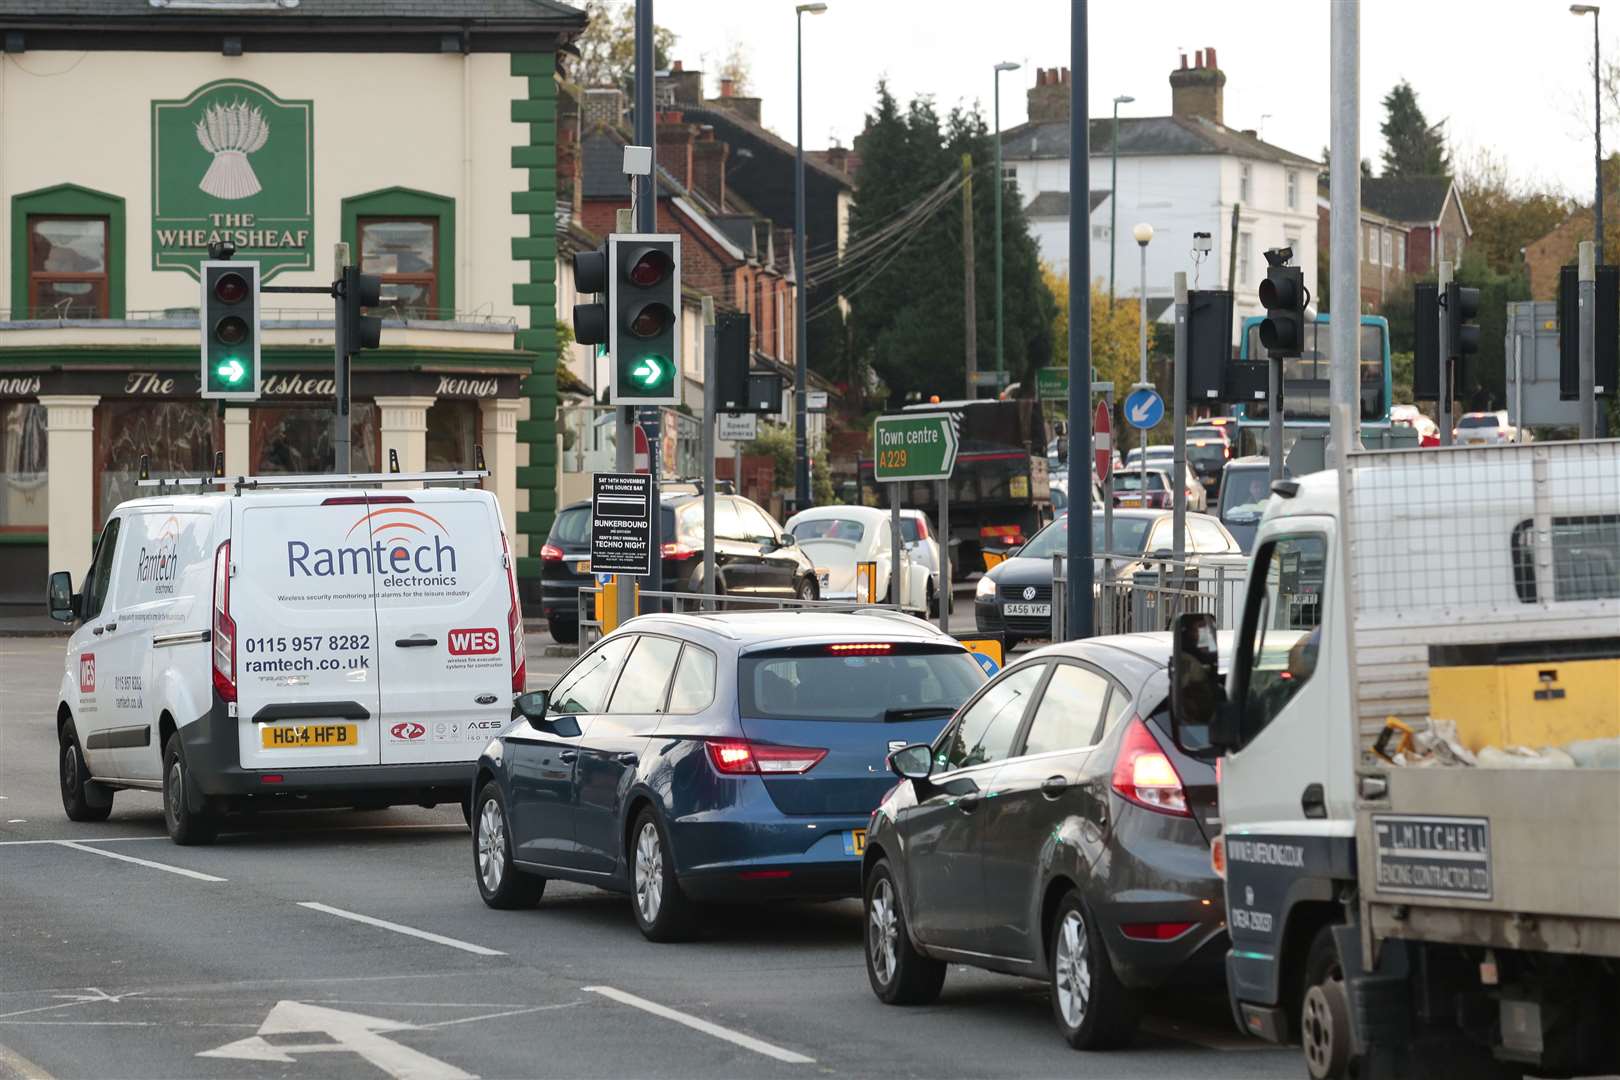 There is frequently congestion at the junction currently